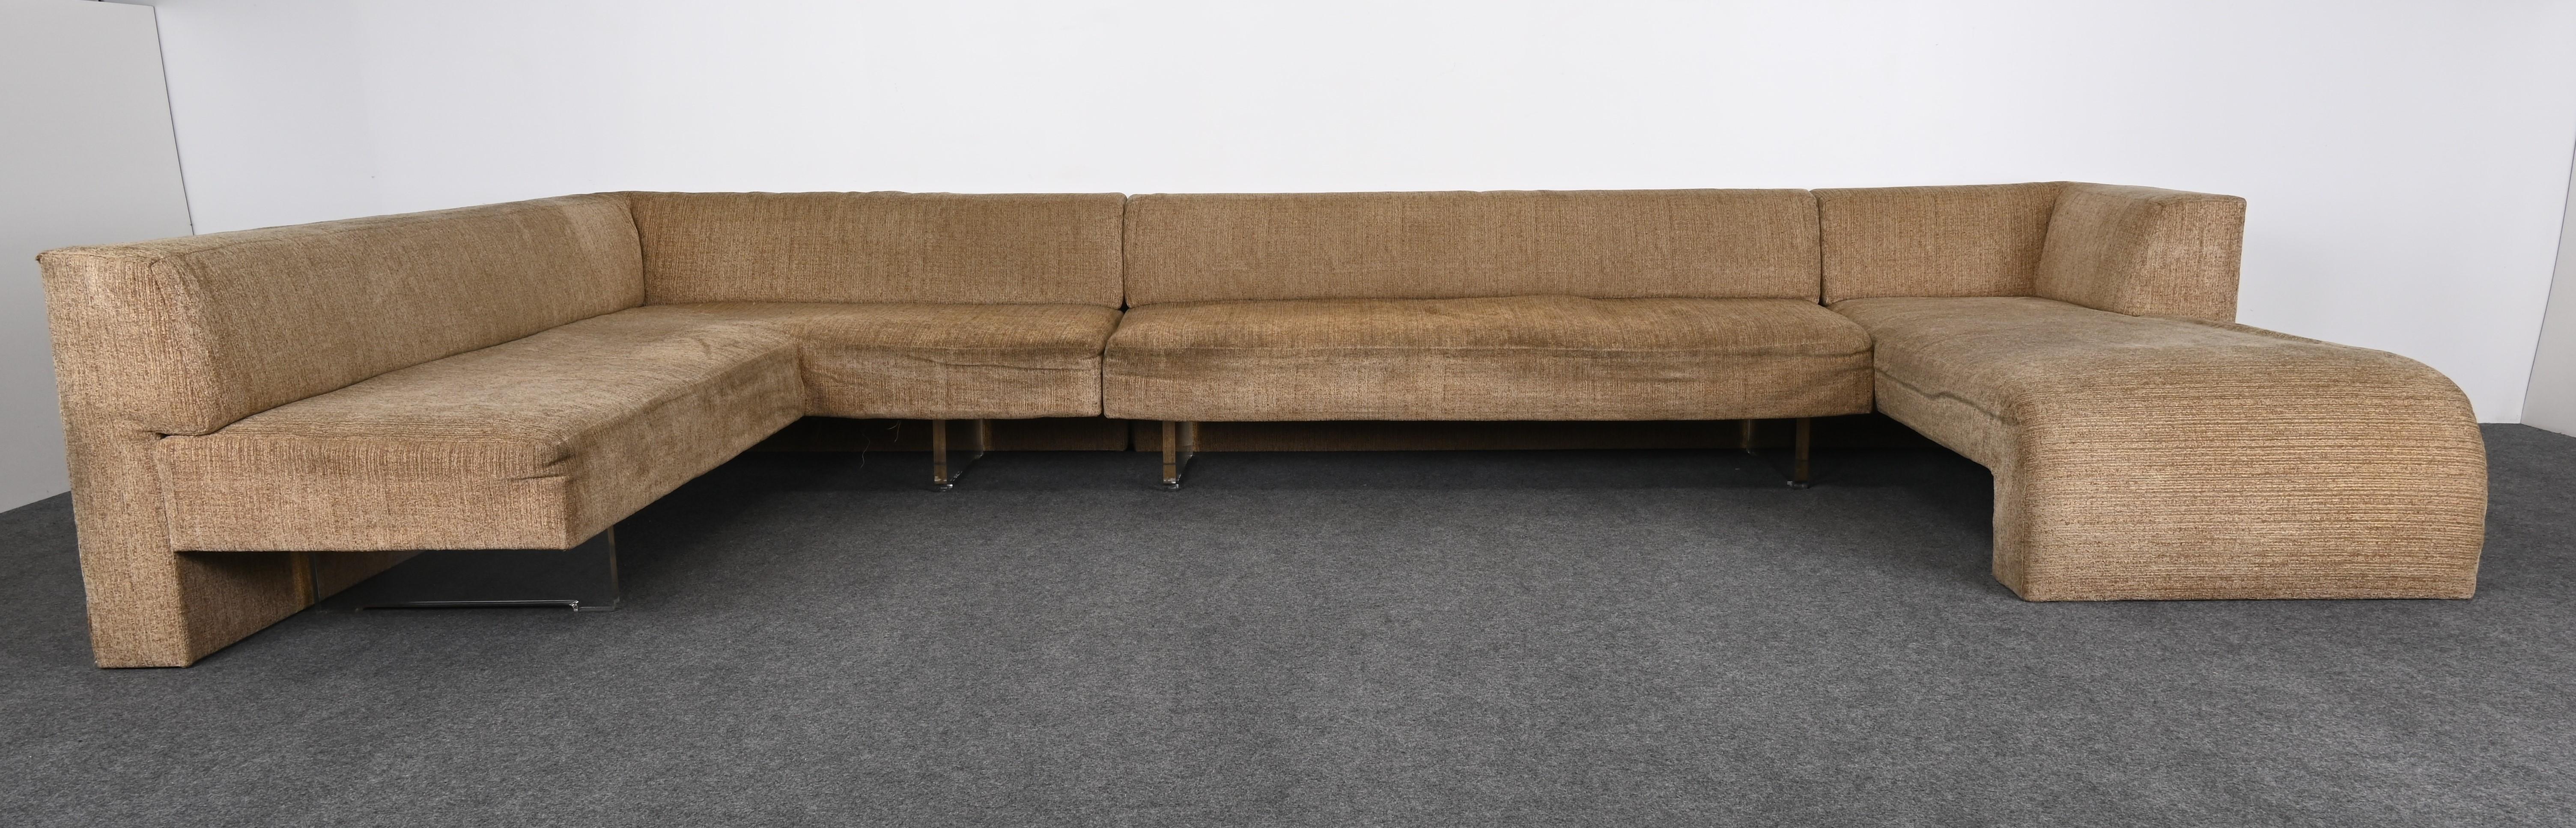 American Monumental Sectional Sofa Designed by Vladimir Kagan, 1970s For Sale